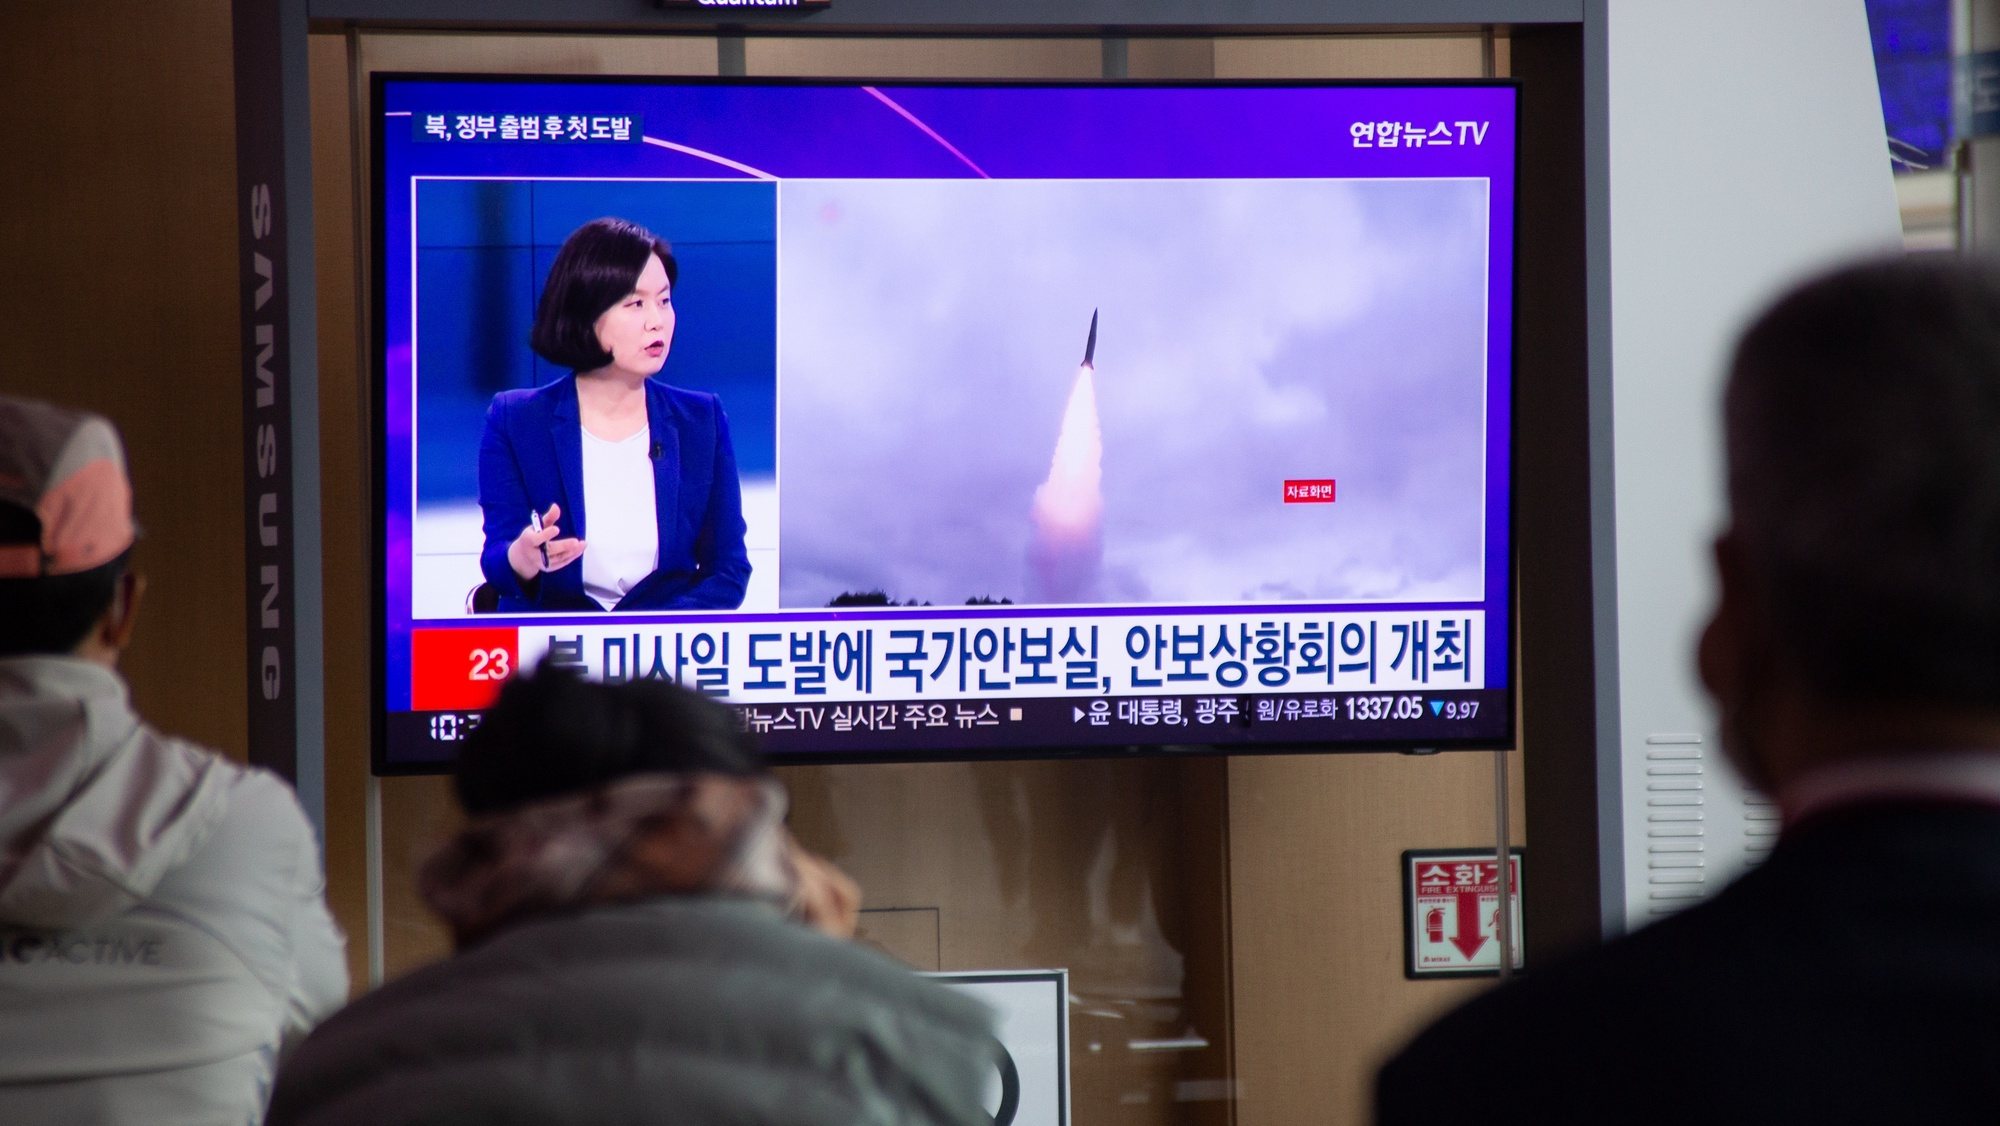 epa09943642 People watch a news report on a North Korean missile launch at a station in Seoul, South Korea, 13 May 2022. According to South Korea&#039;s Joint Chiefs of Staff (JCS), North Korea fired three ballistic missile toward the East Sea on 12 May.  EPA/JEON HEON-KYUN